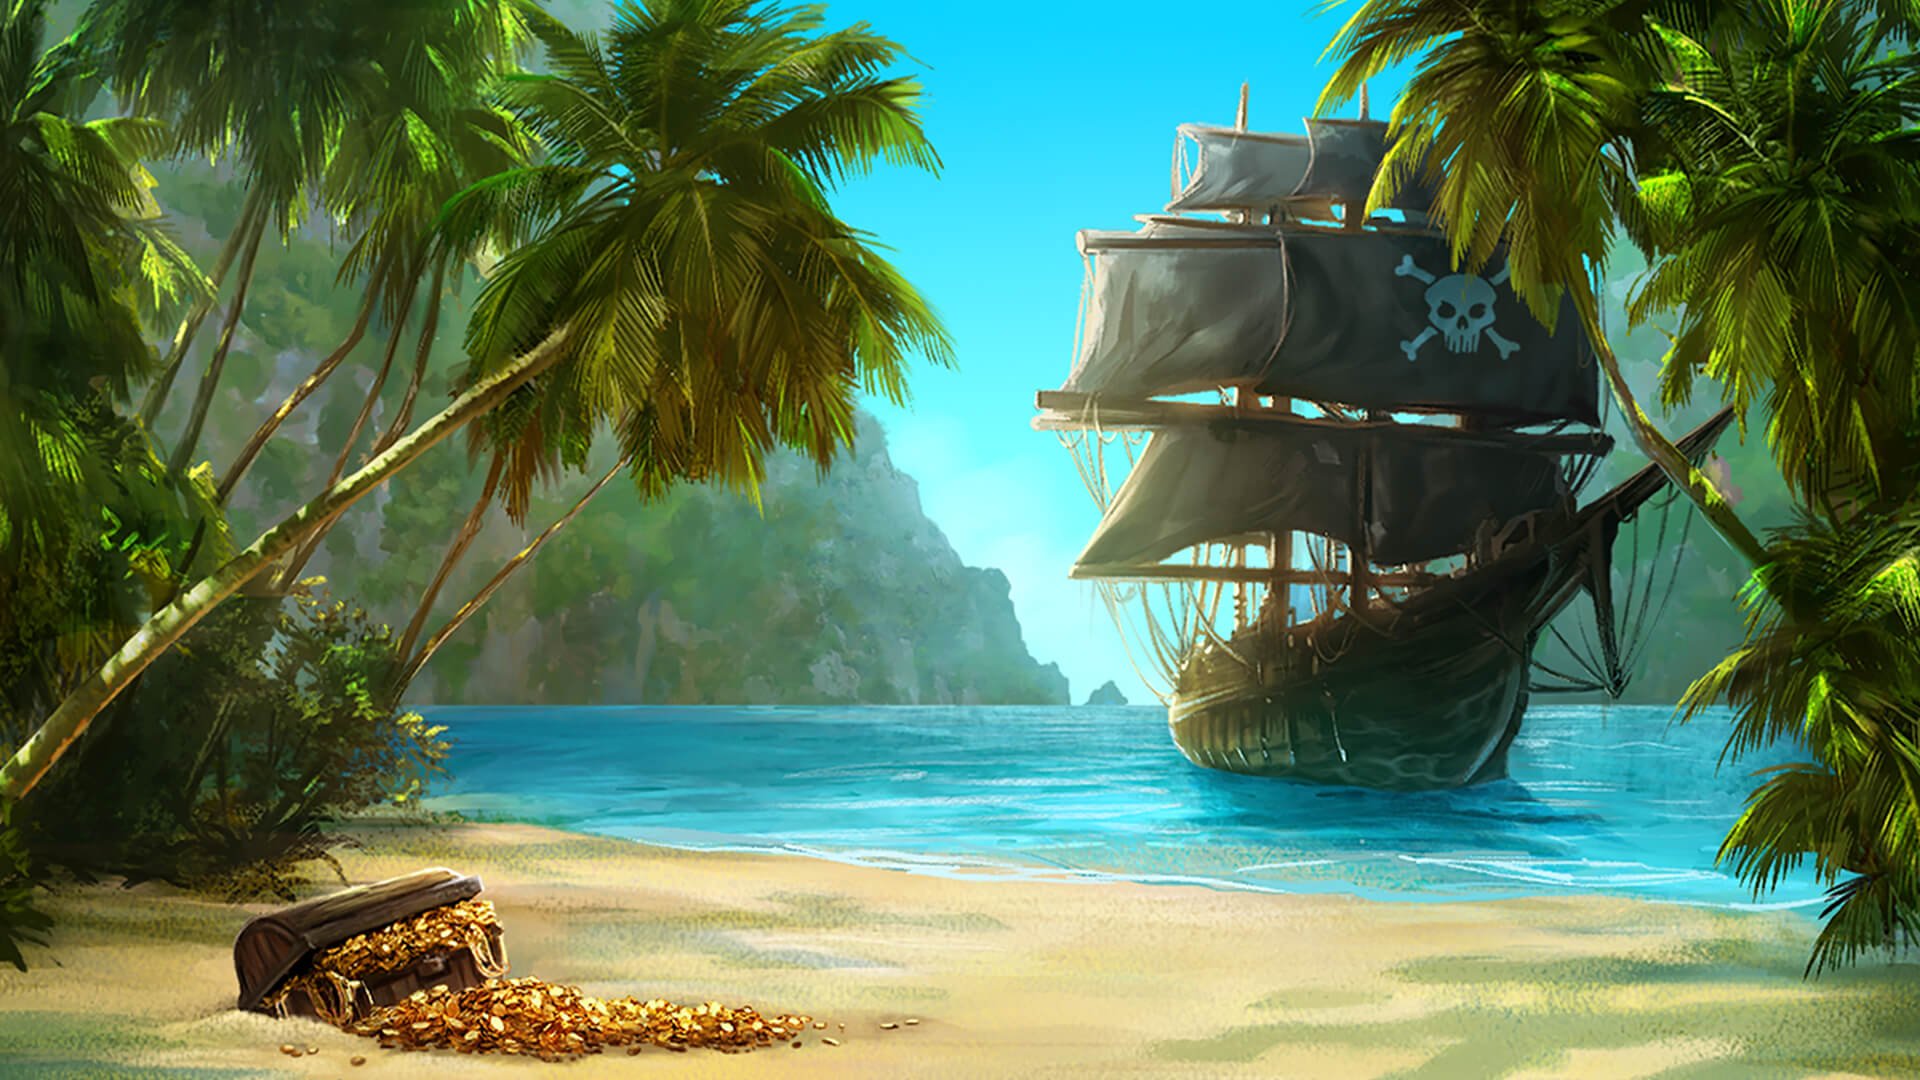 Game hight resolution background Pirate's Charm